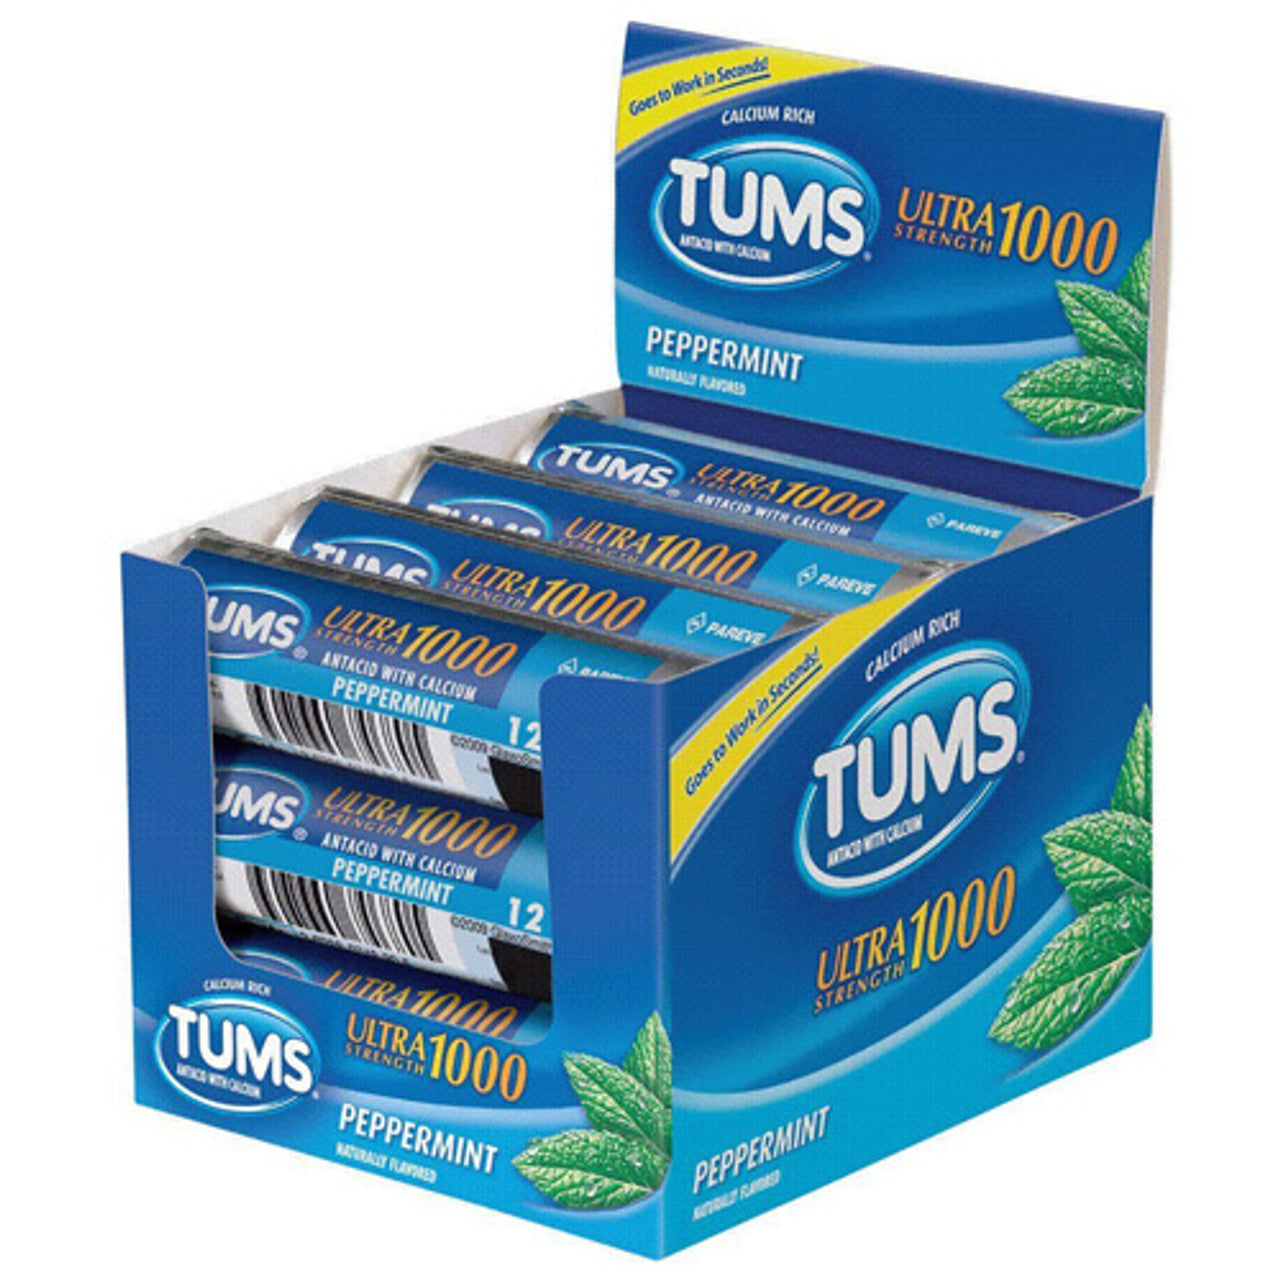 Tums Ultra Strength 1000, Calcium Rich Peppermint - 12 mints per roll, 1 roll